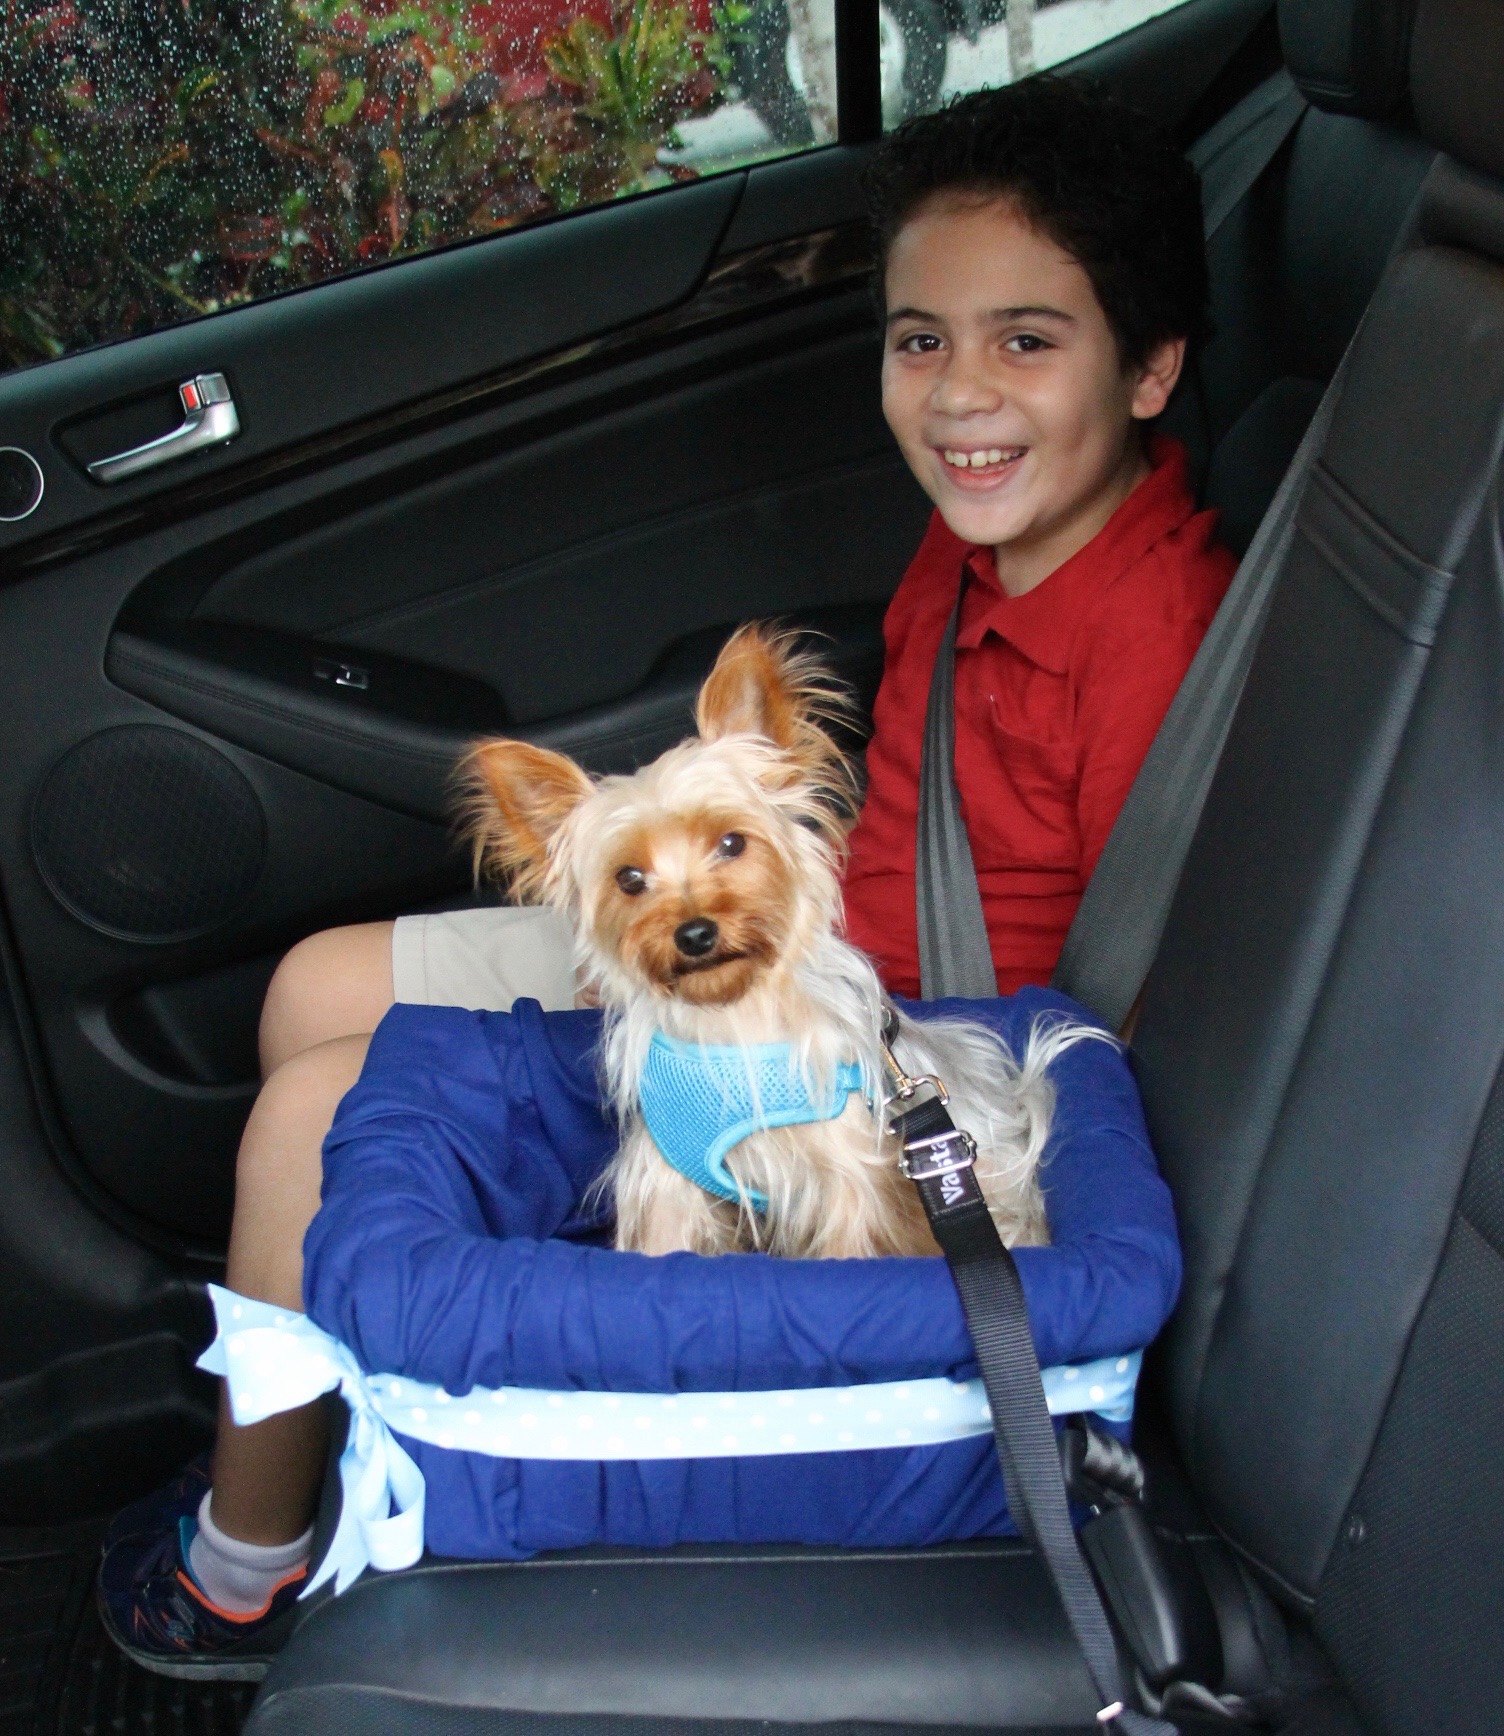 No-Sew DIY Car Booster Seat For Your Dog